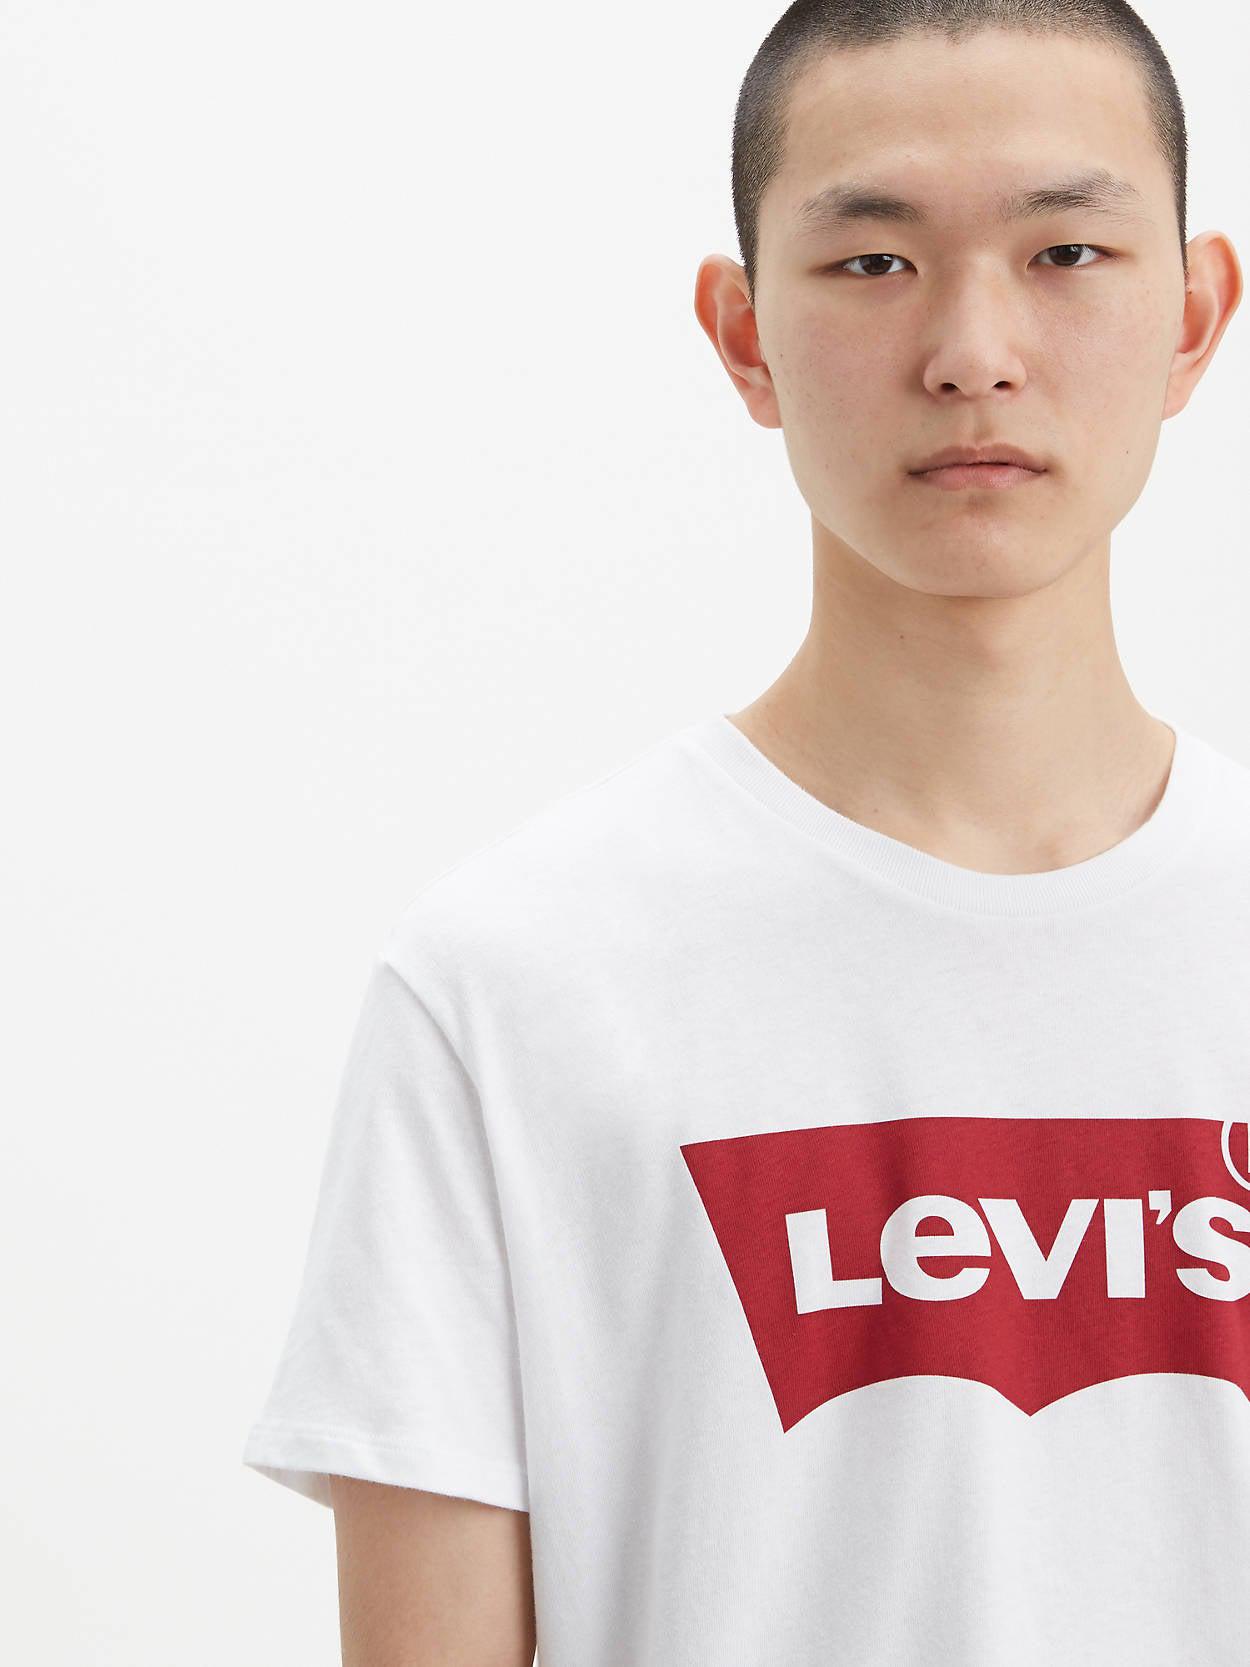 Levi's Mens Logo Tee, Free Canada-Wide Shipping Over $75